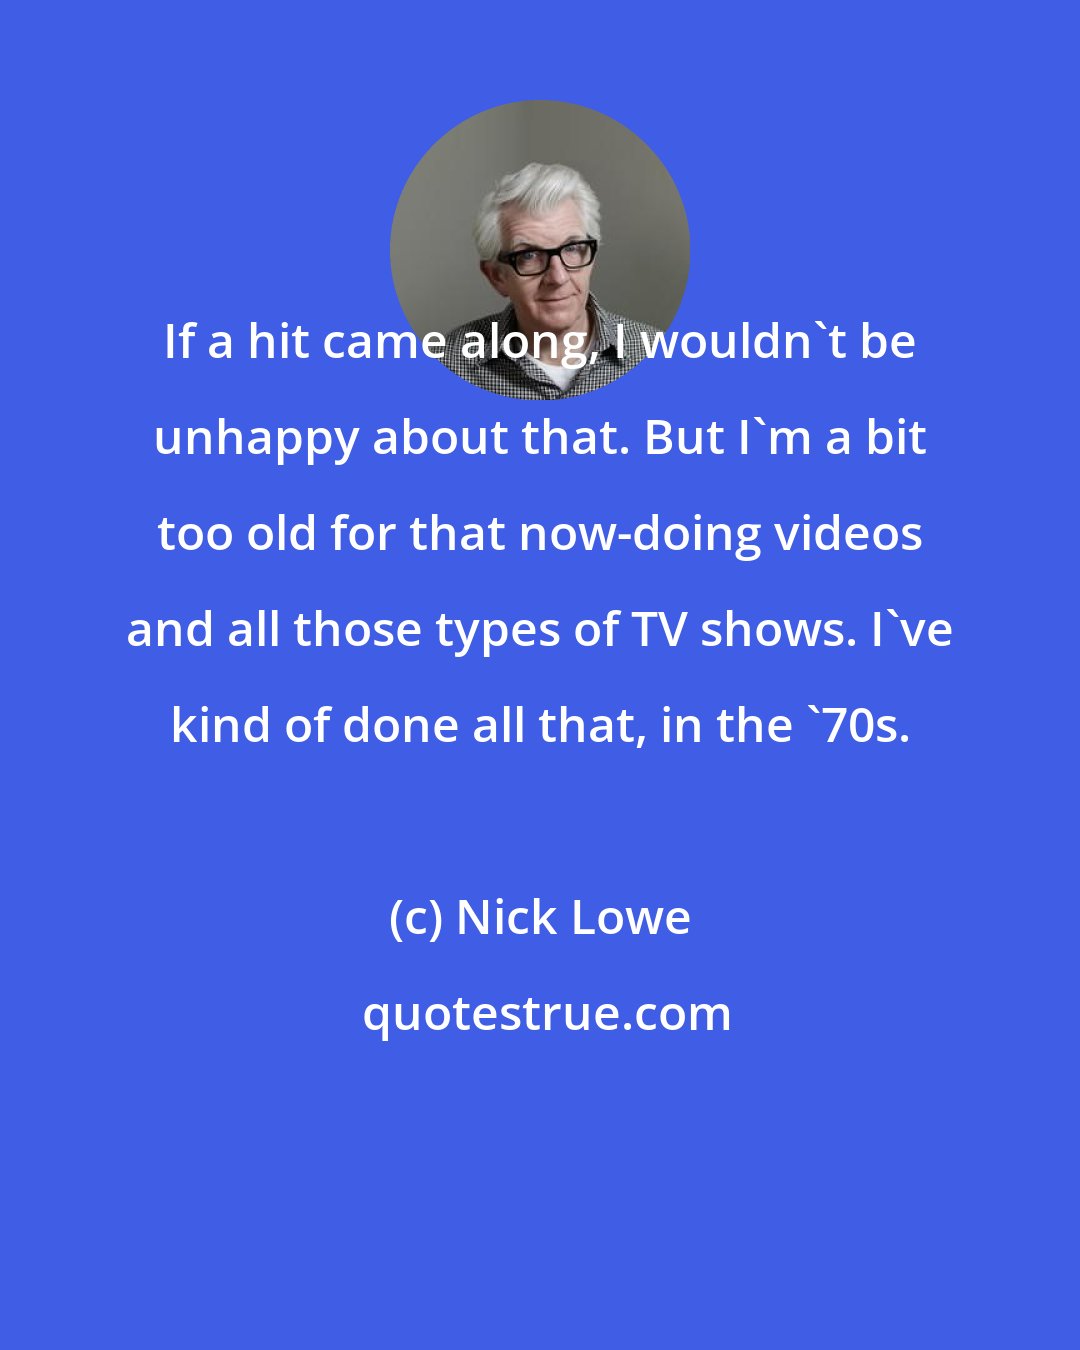 Nick Lowe: If a hit came along, I wouldn't be unhappy about that. But I'm a bit too old for that now-doing videos and all those types of TV shows. I've kind of done all that, in the '70s.